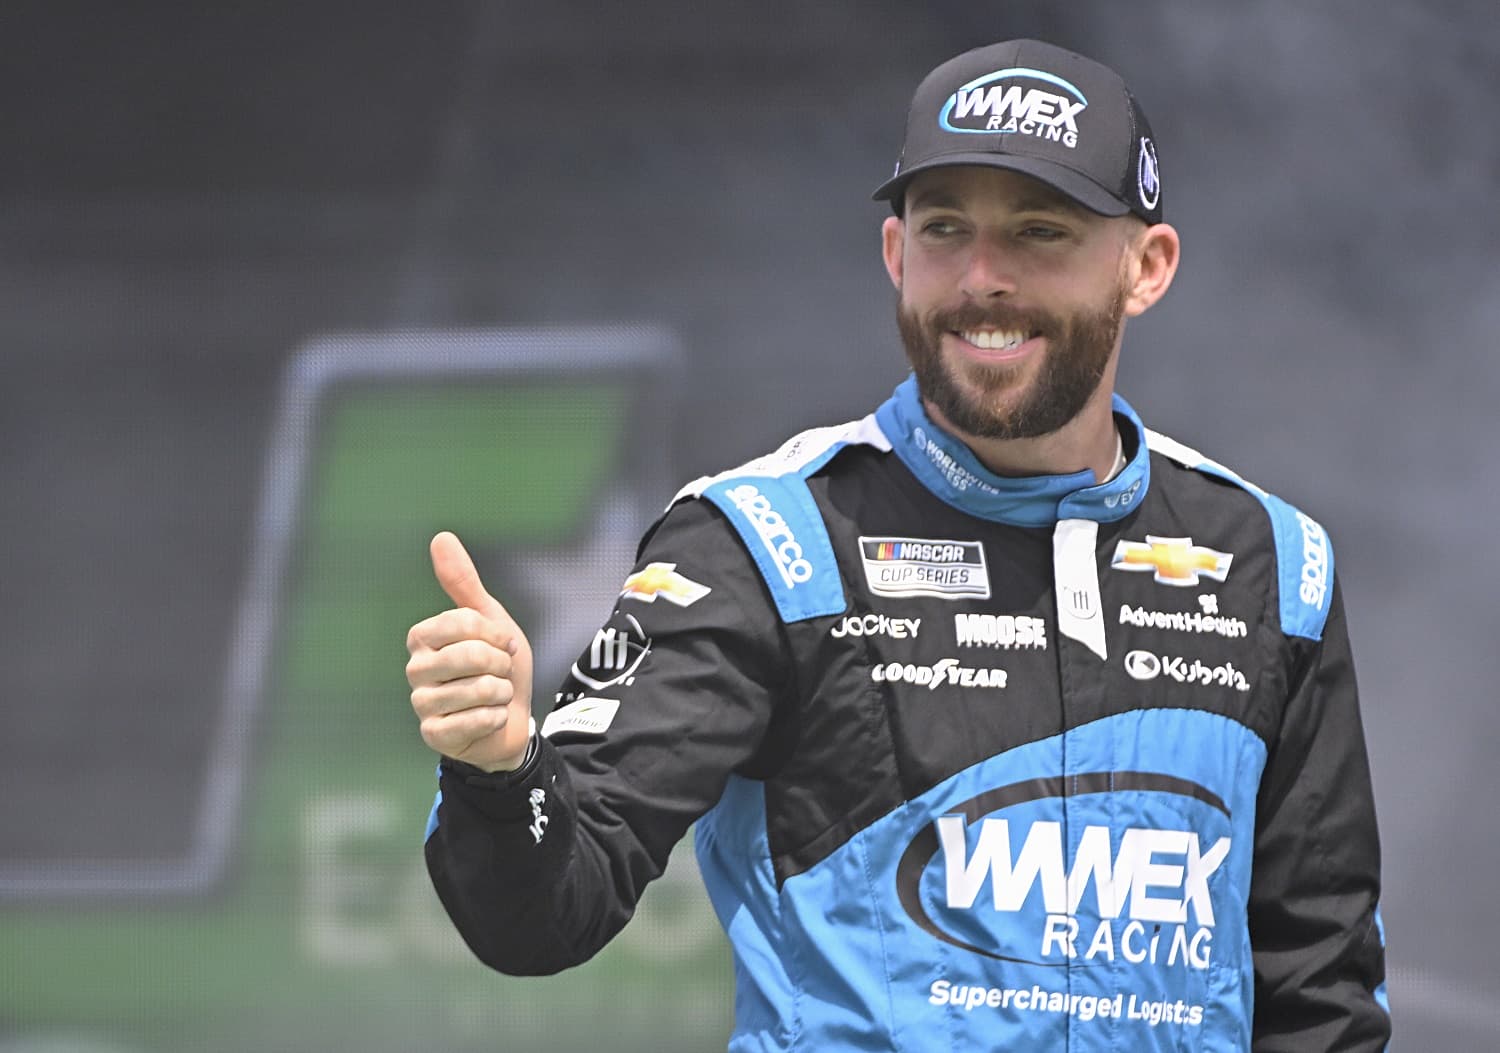 Ross Chastain gives a thumbs-up to fans as he walks onstage during driver intros for the NASCAR Cup Series EchoPark Automotive Grand Prix at Circuit of The Americas on March 26, 2023.